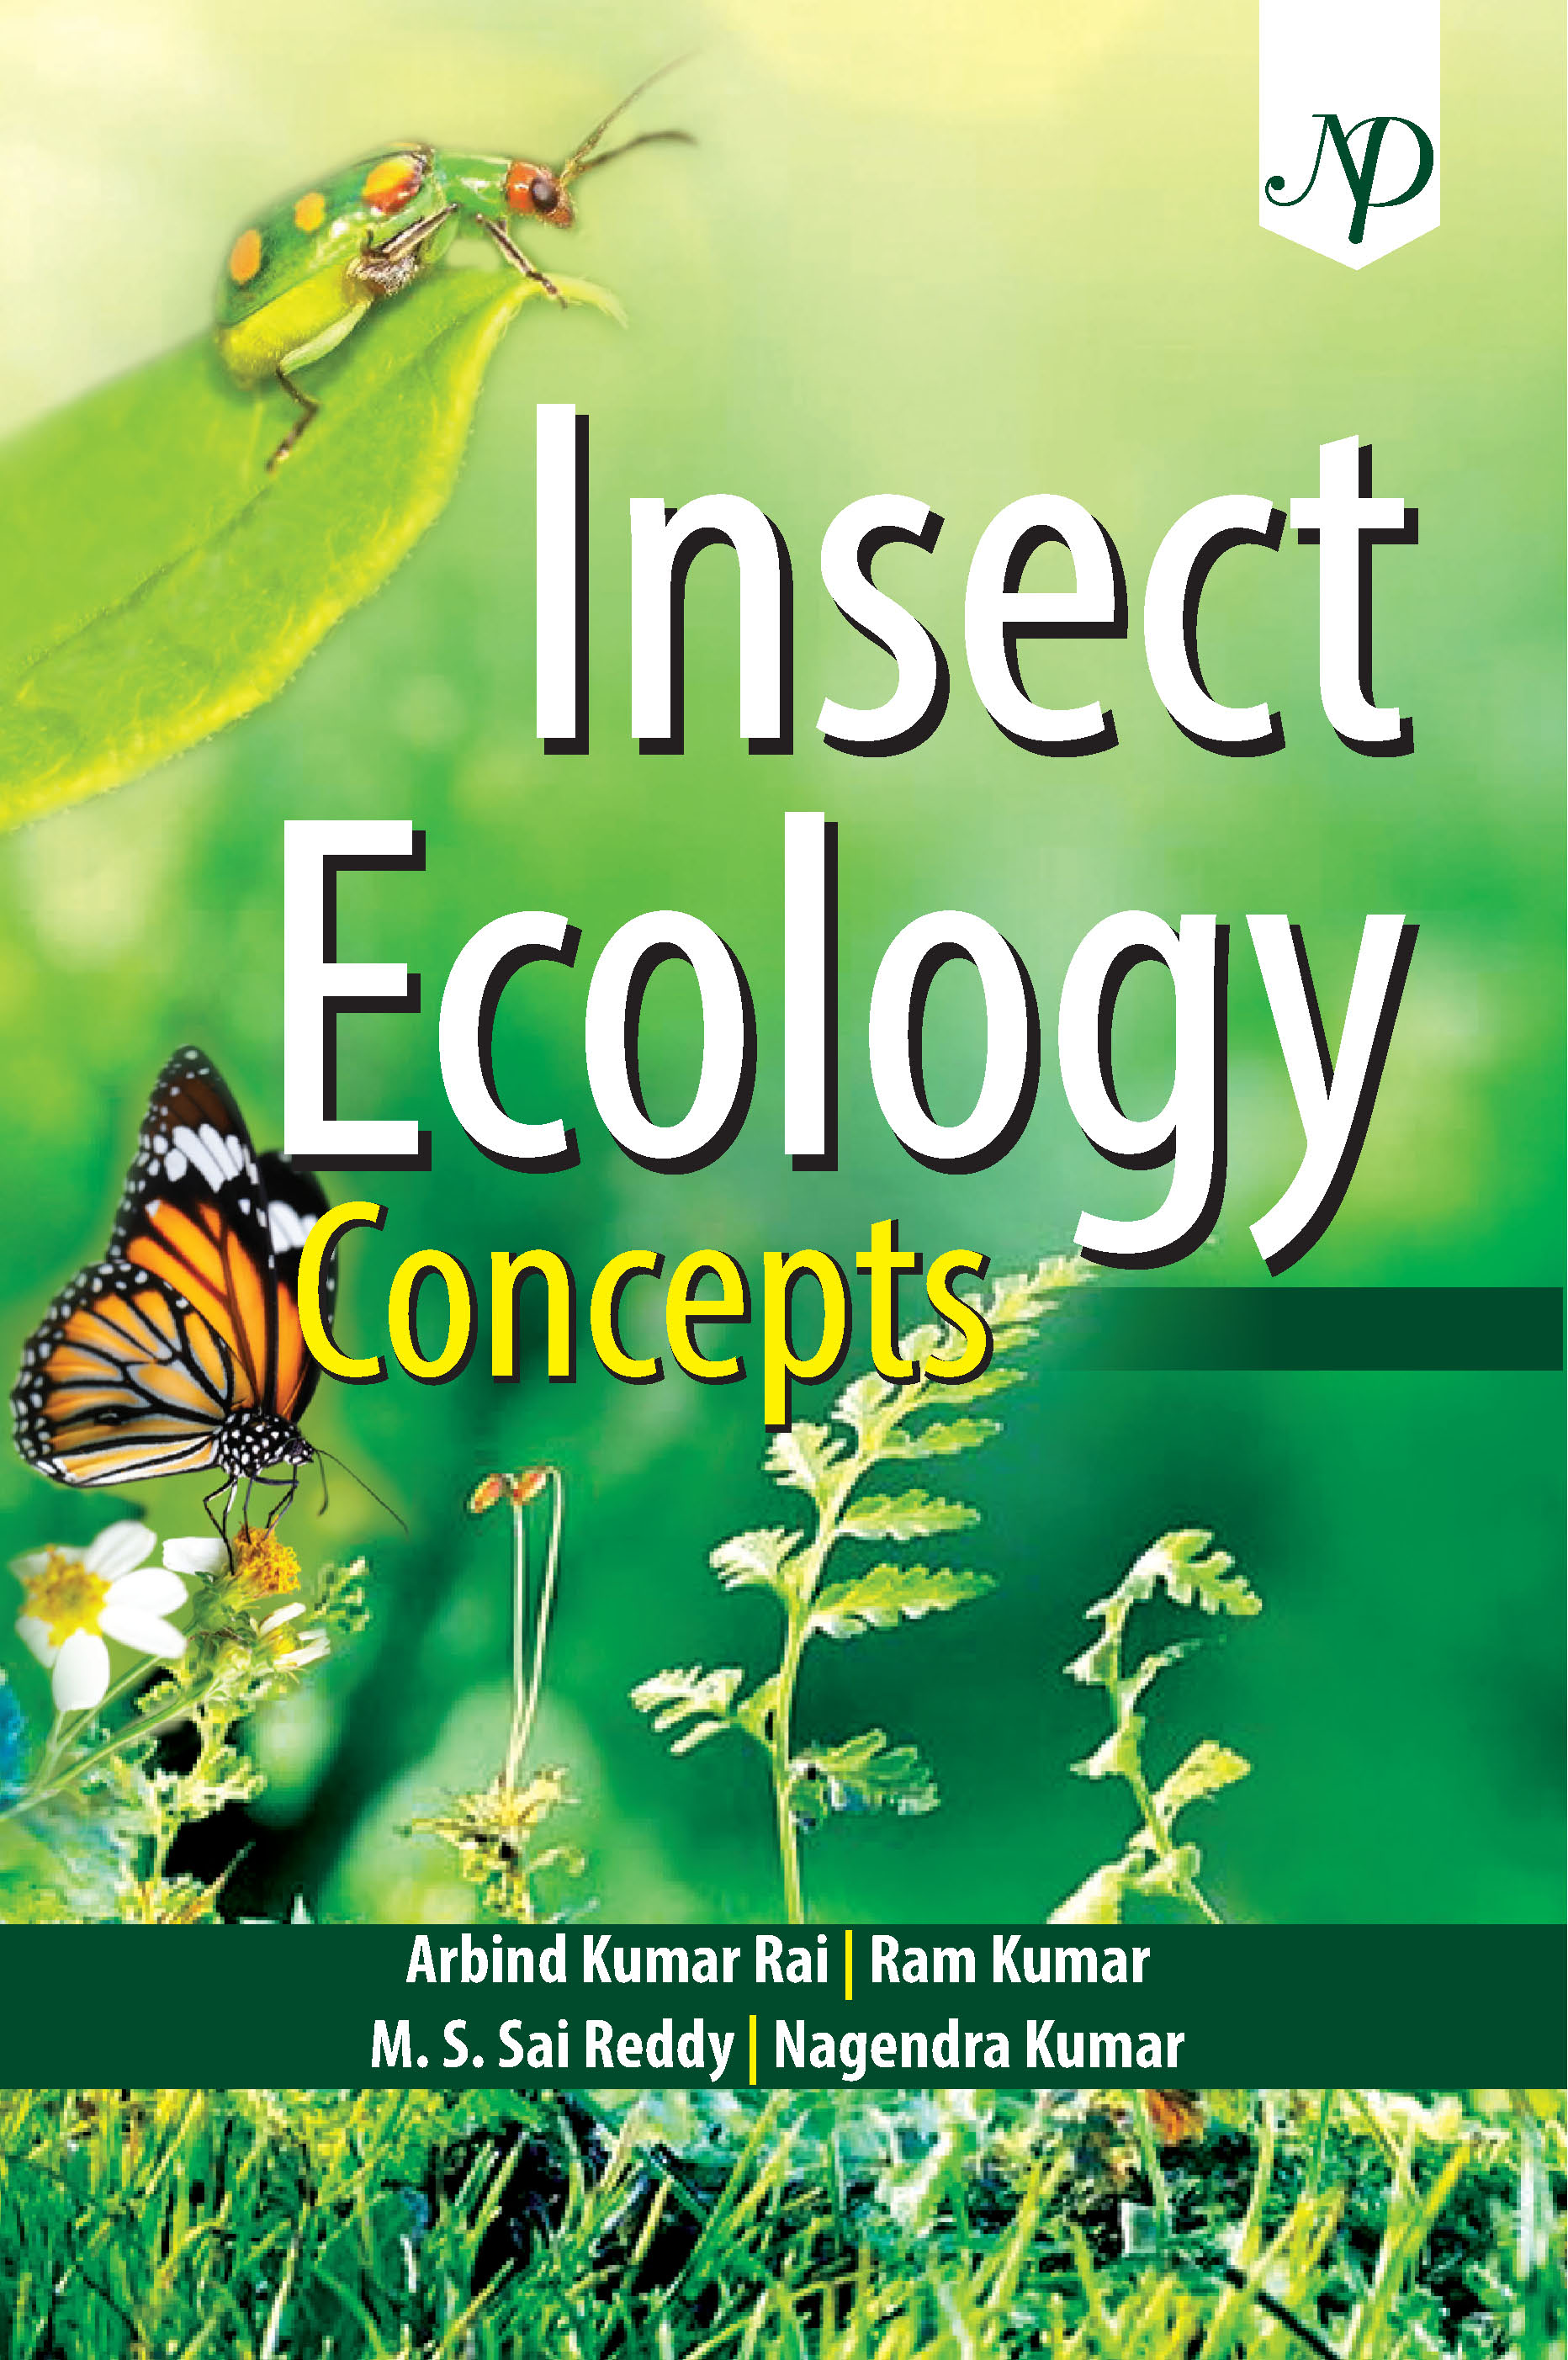 Insect Ecology Concepts Cover.jpg